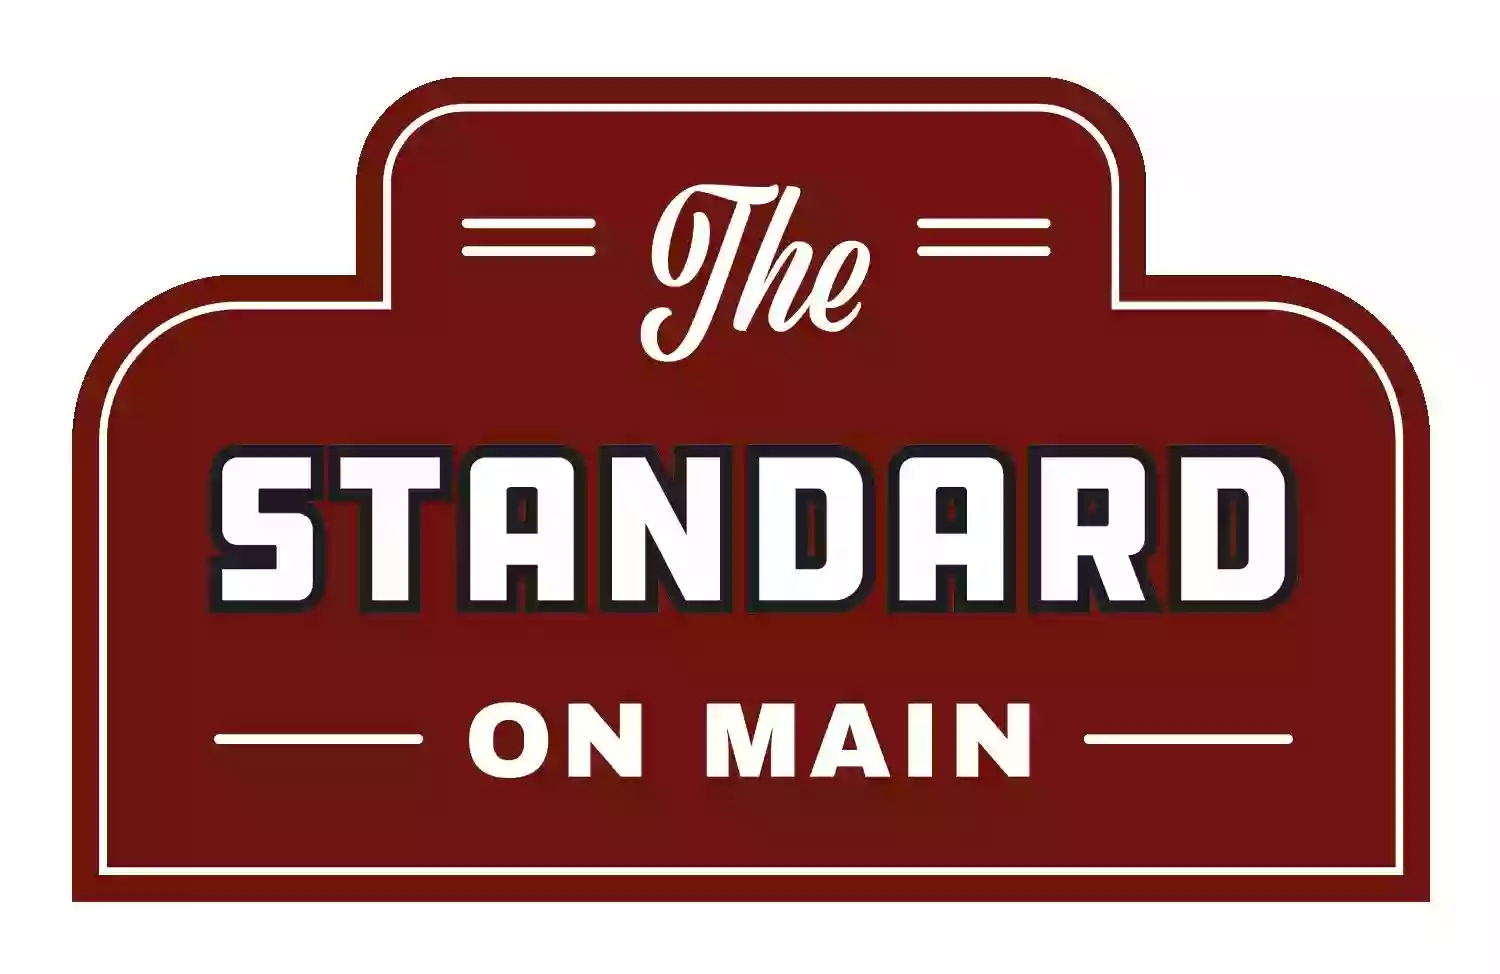 The Standard on Main